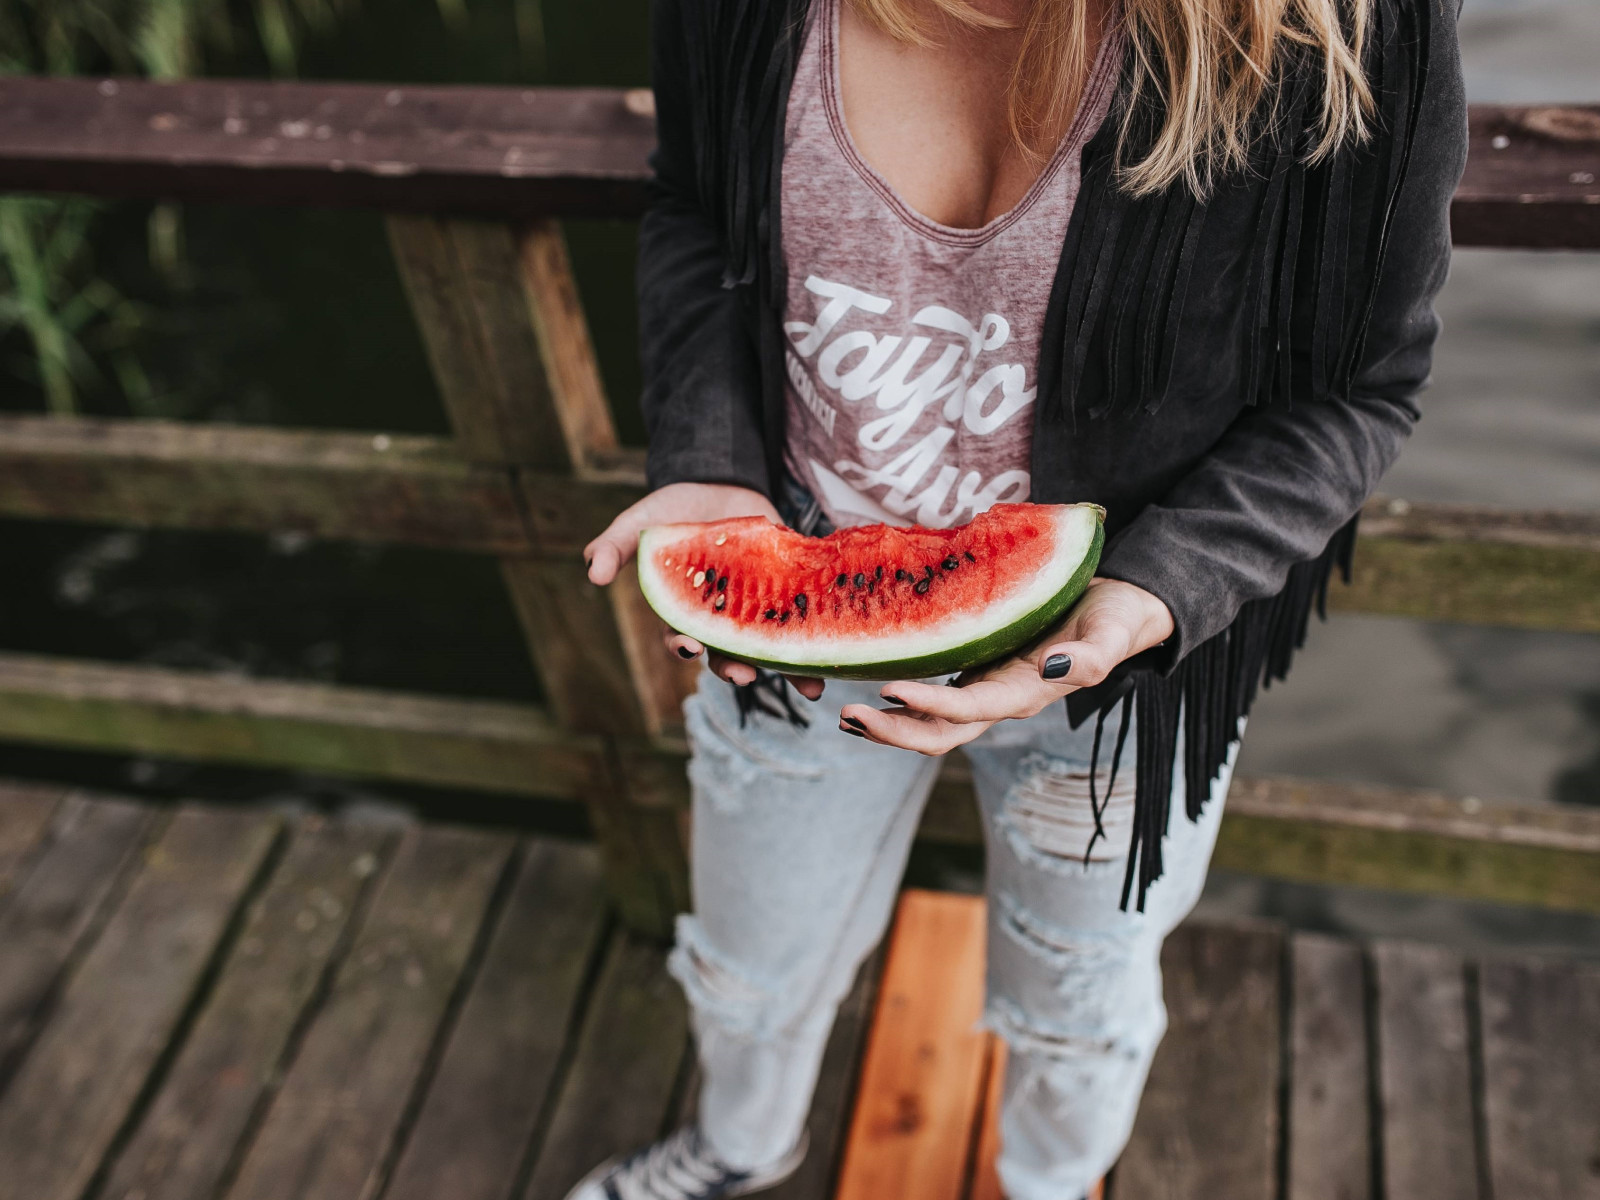 The girl with a watermelon slice wallpaper 1600x1200